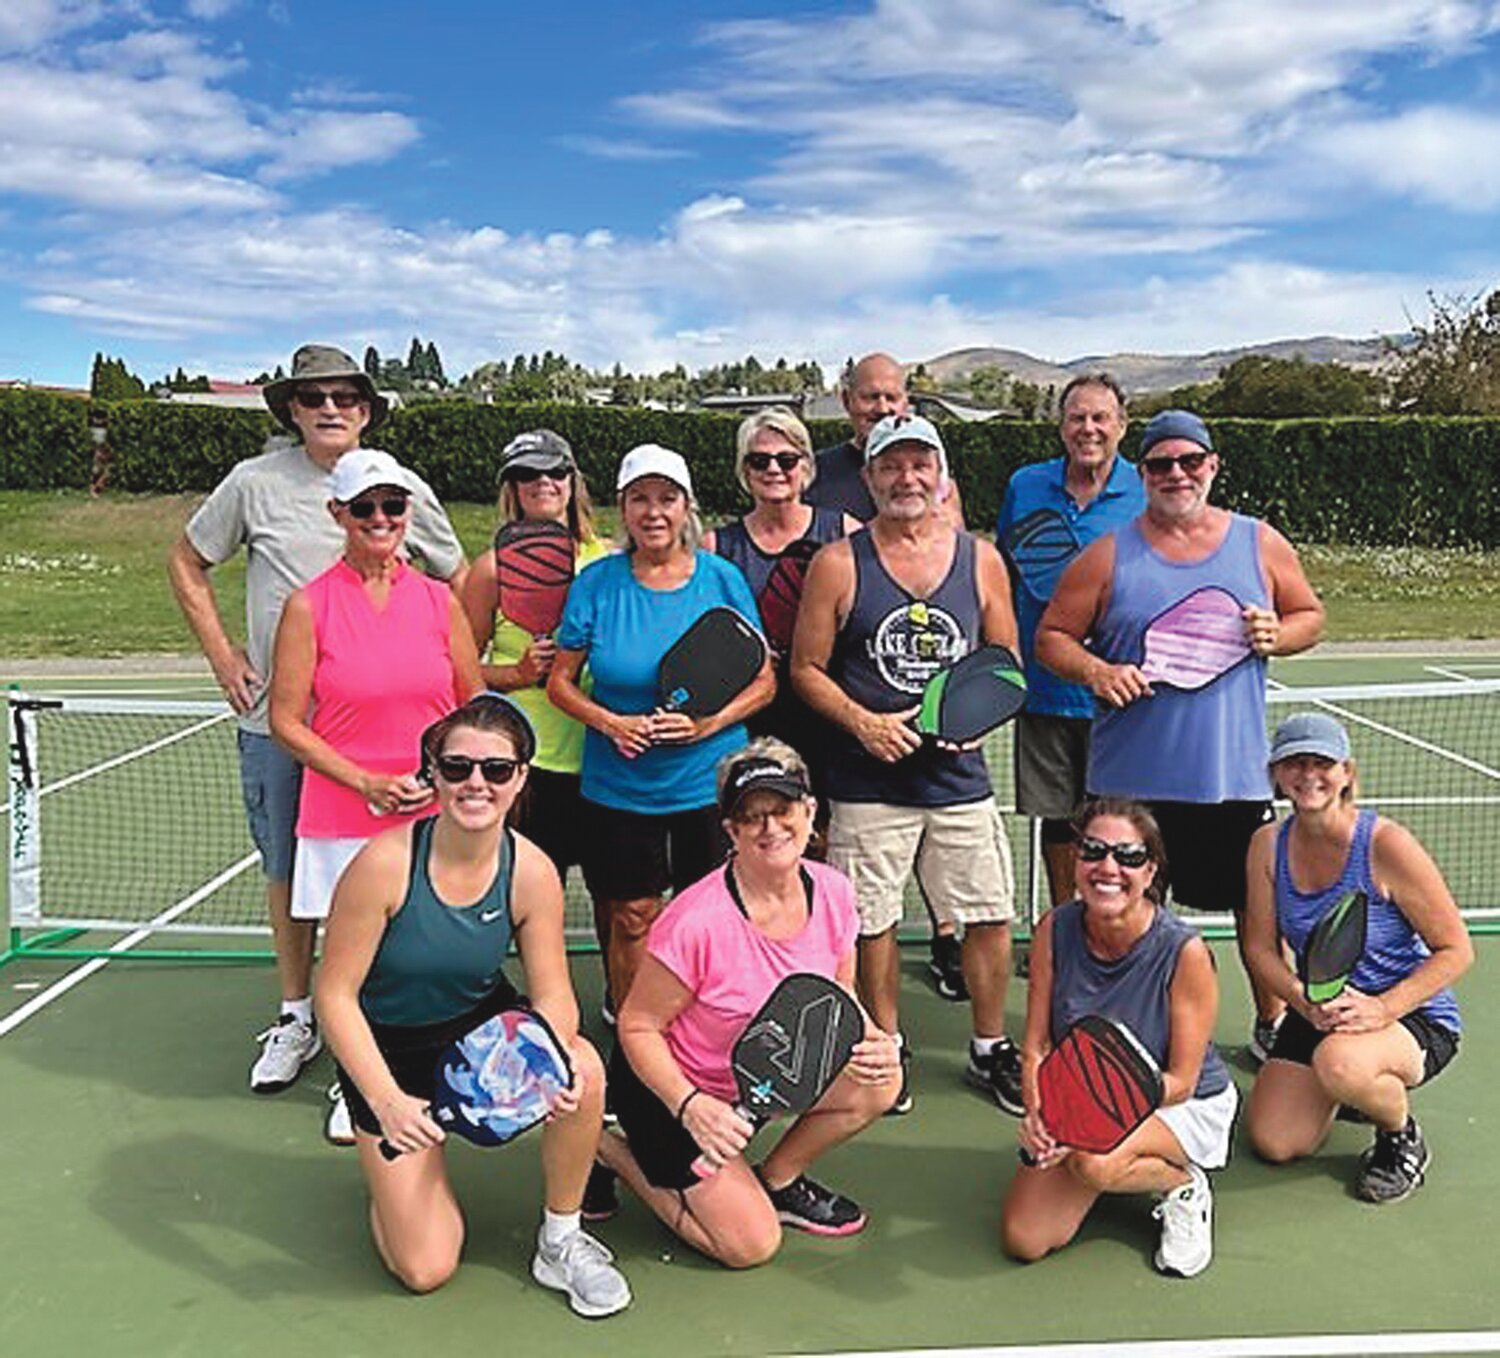 Picketball players: front row: Miranda Pehrson, Brenda Brooks-Gelwicks, Liza Pehrson and Roxanne Camp; middle row: Jeannie Shively, Suzanne Milliken, Rocky Camp and Dean Cooper; and back row: Stuart Fraser, Marla Gross, Ginny Miller, Ken Gross, and Bill Miller.